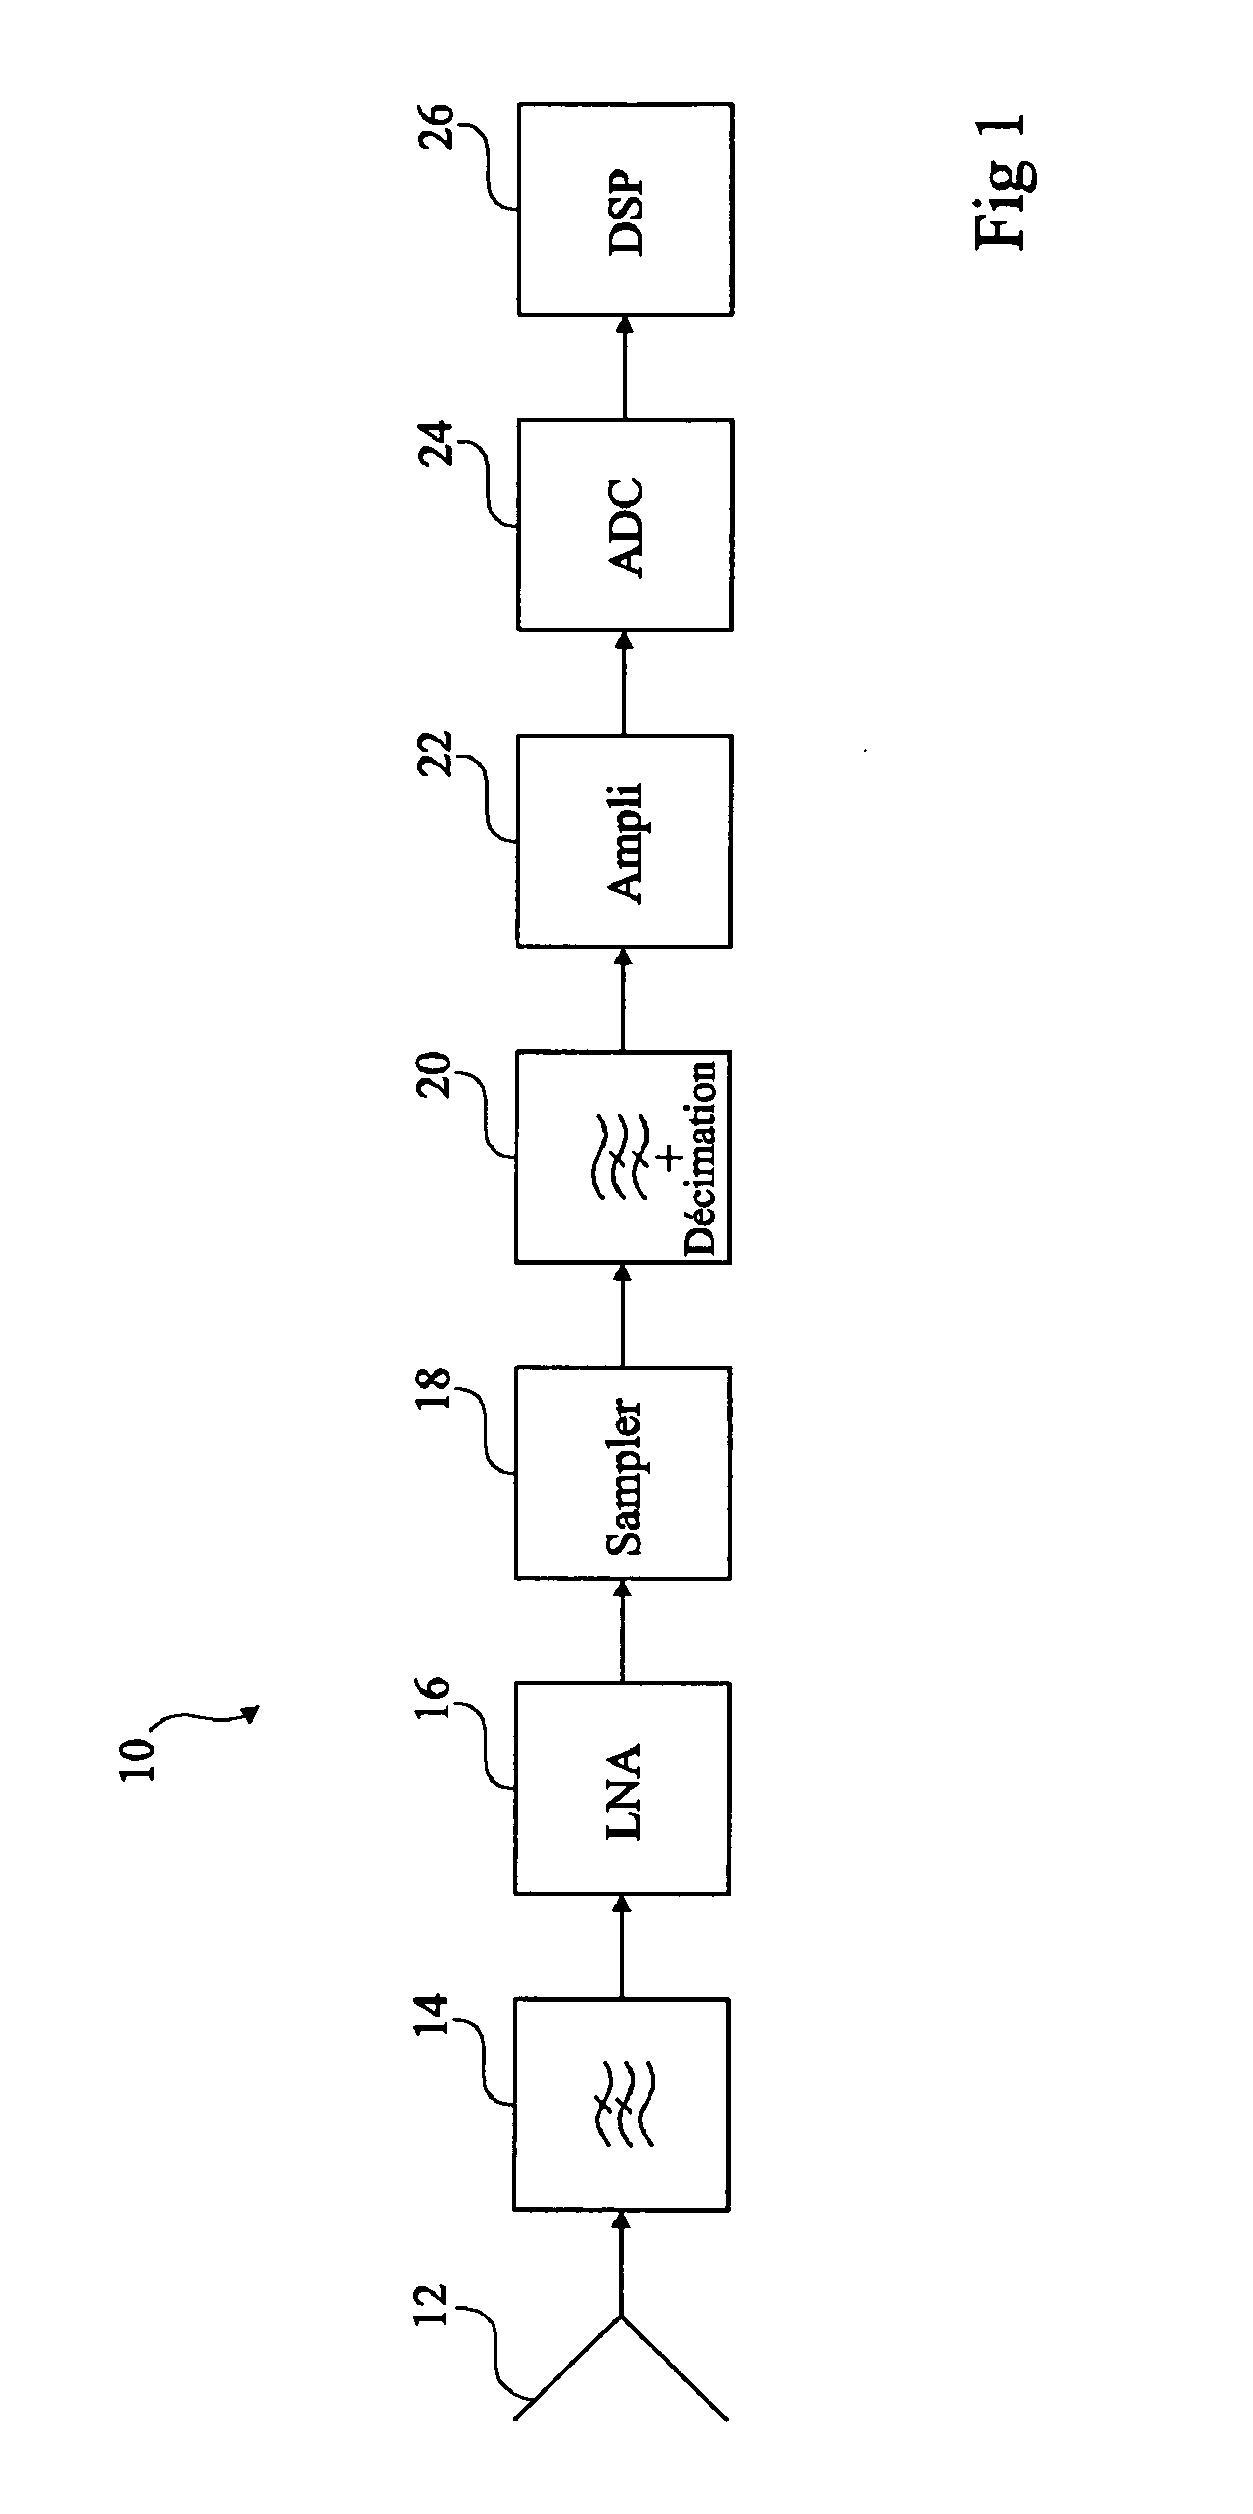 Analog filter with passive components for discrete time signals